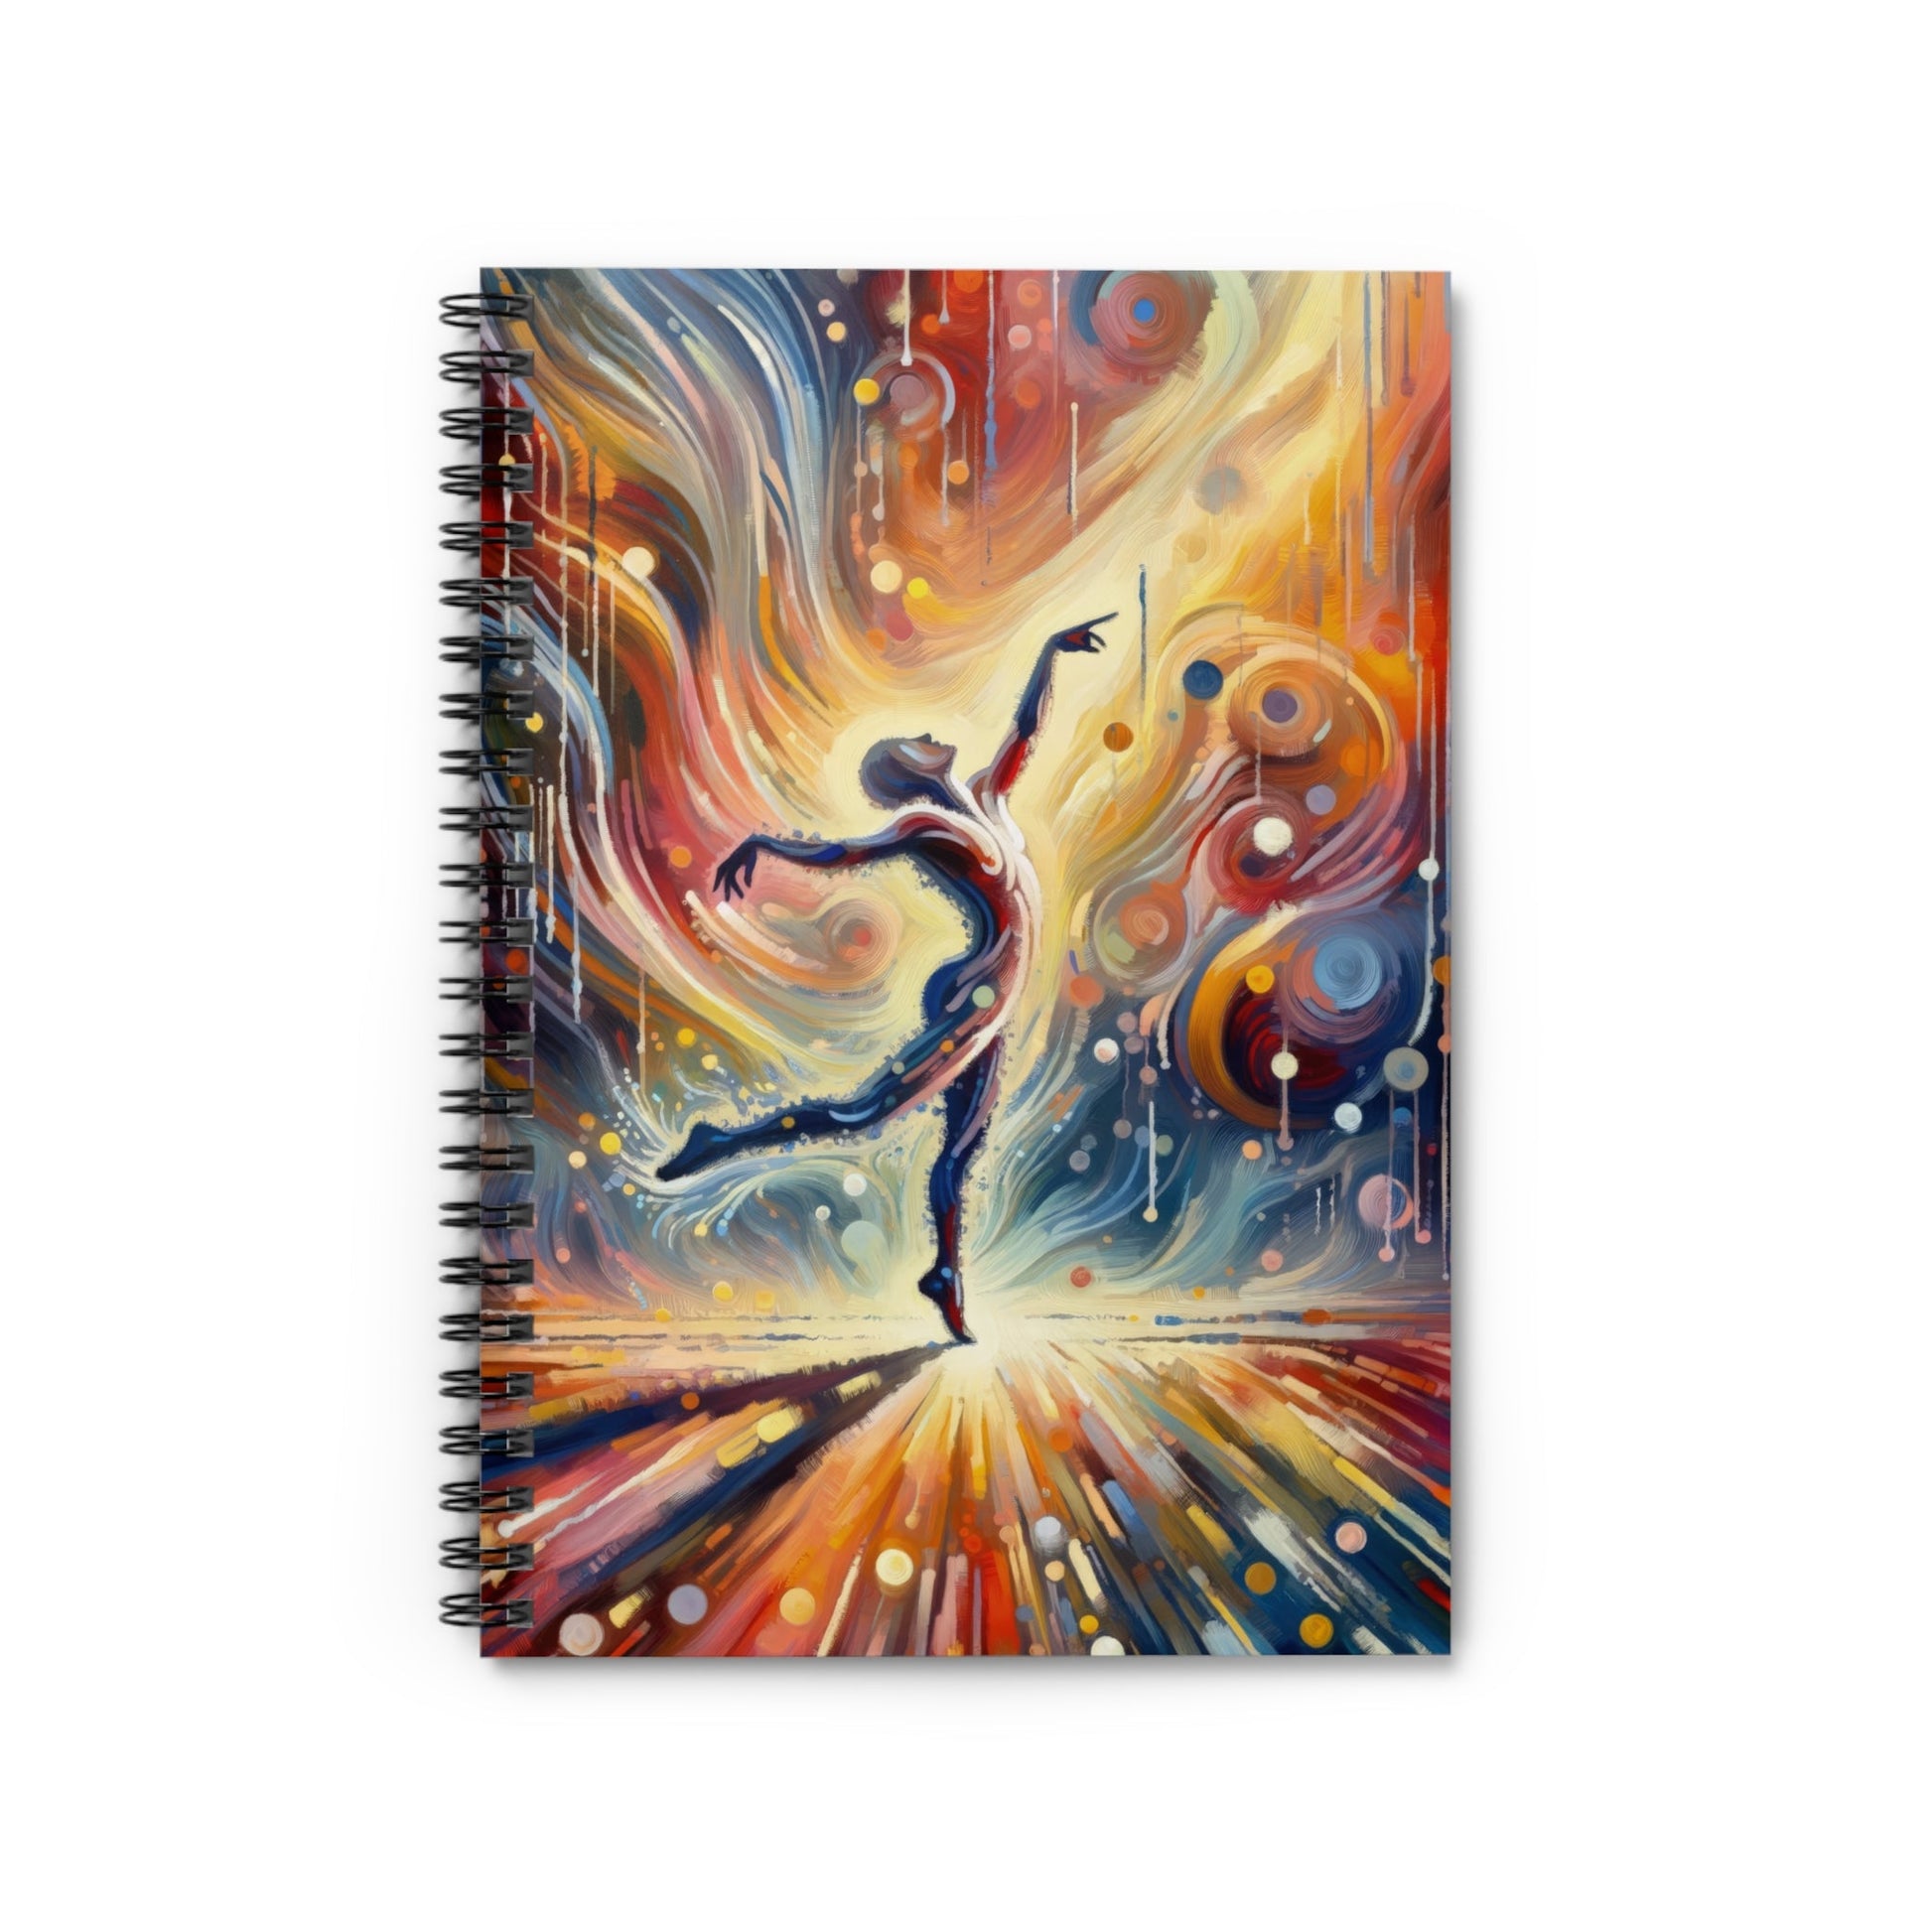 Wholehearted Divine Dance Spiral Notebook - Ruled Line - ATUH.ART